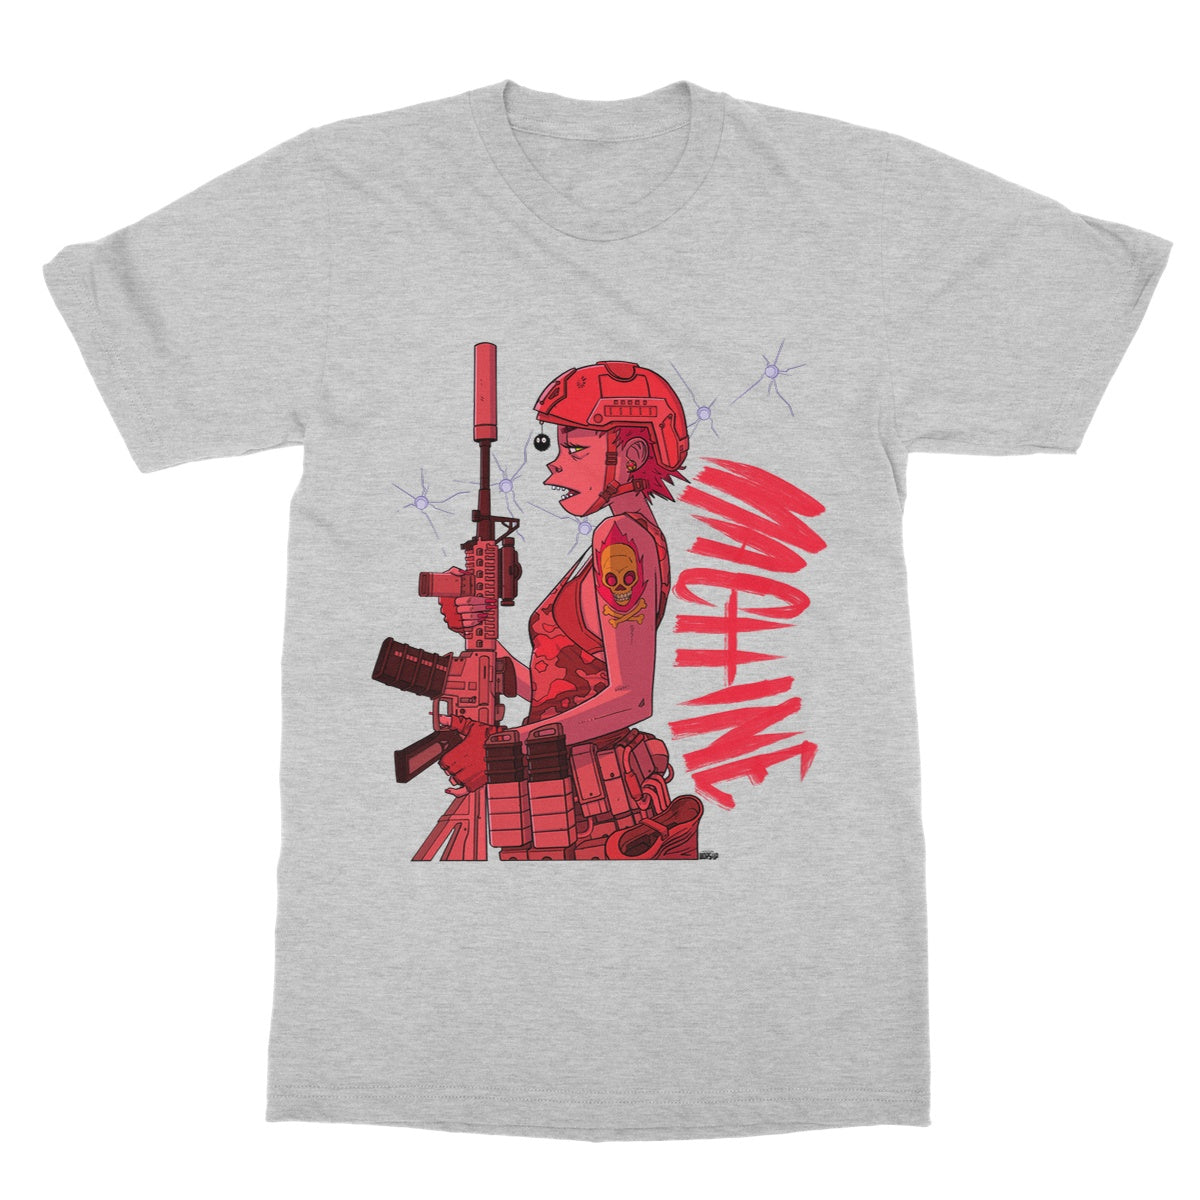 Special Ops female Machine T-Shirt